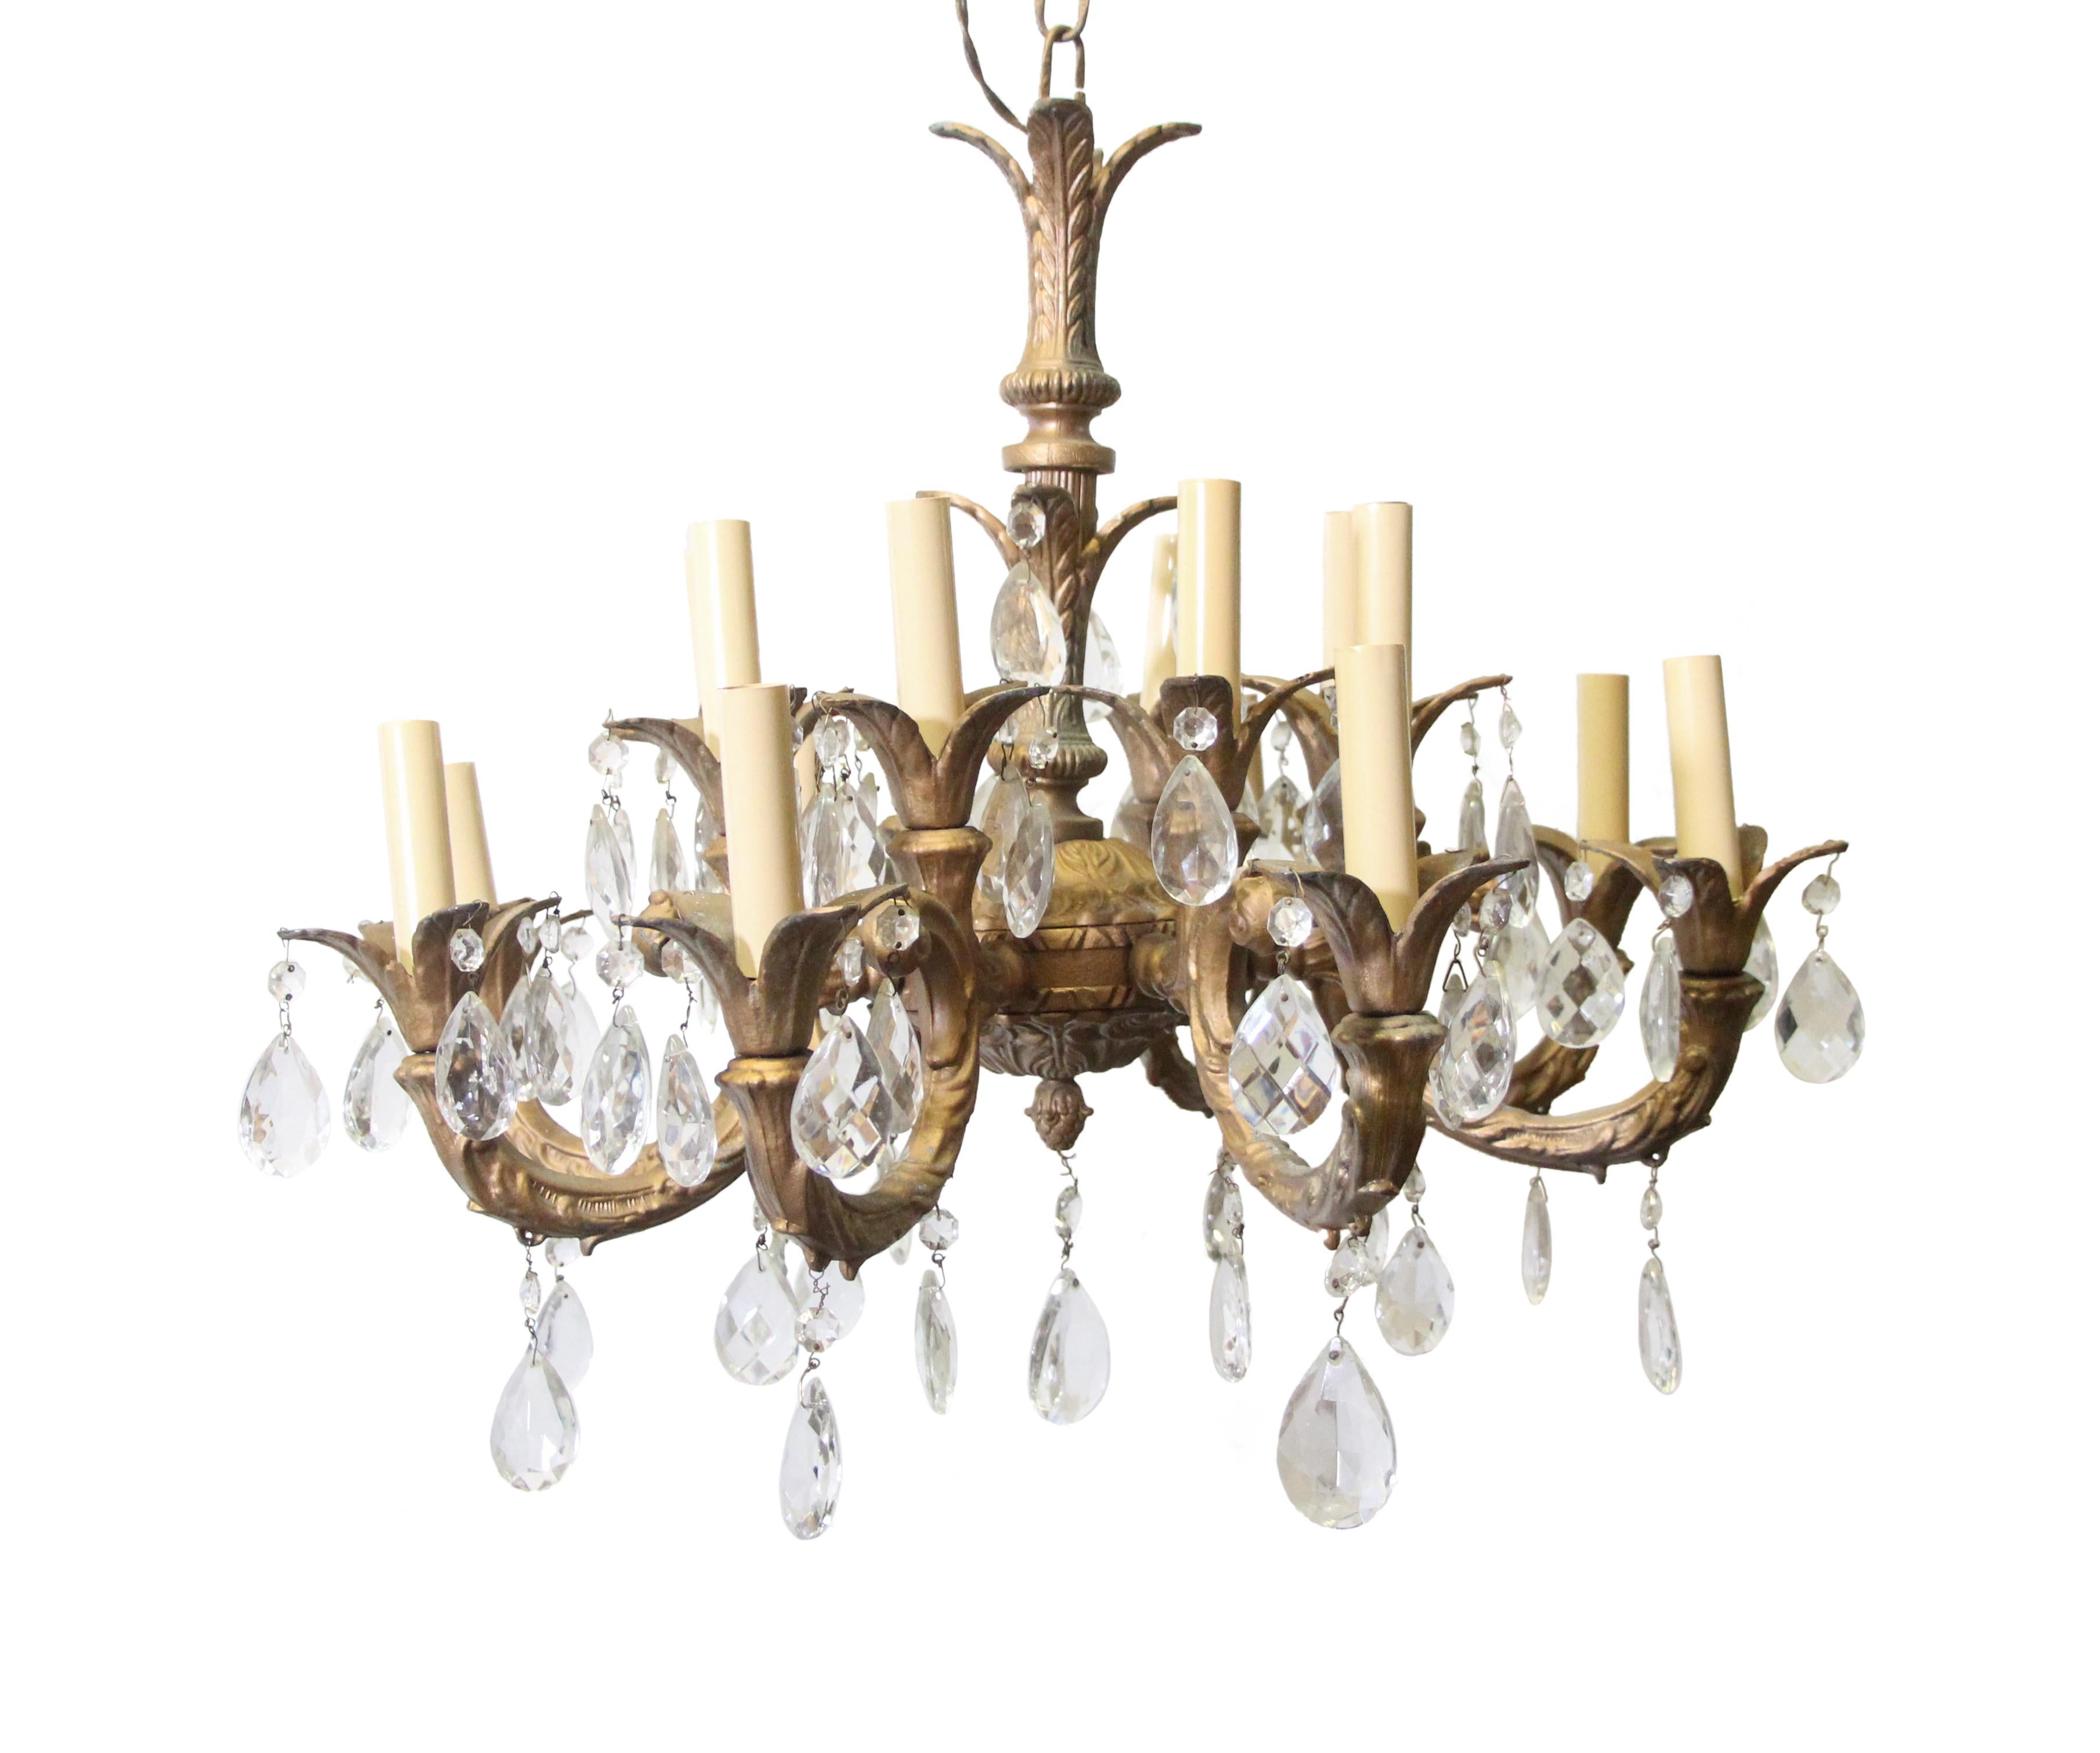 Spanish 16 Light Crystal and Brass Chandelier with 8 Arms